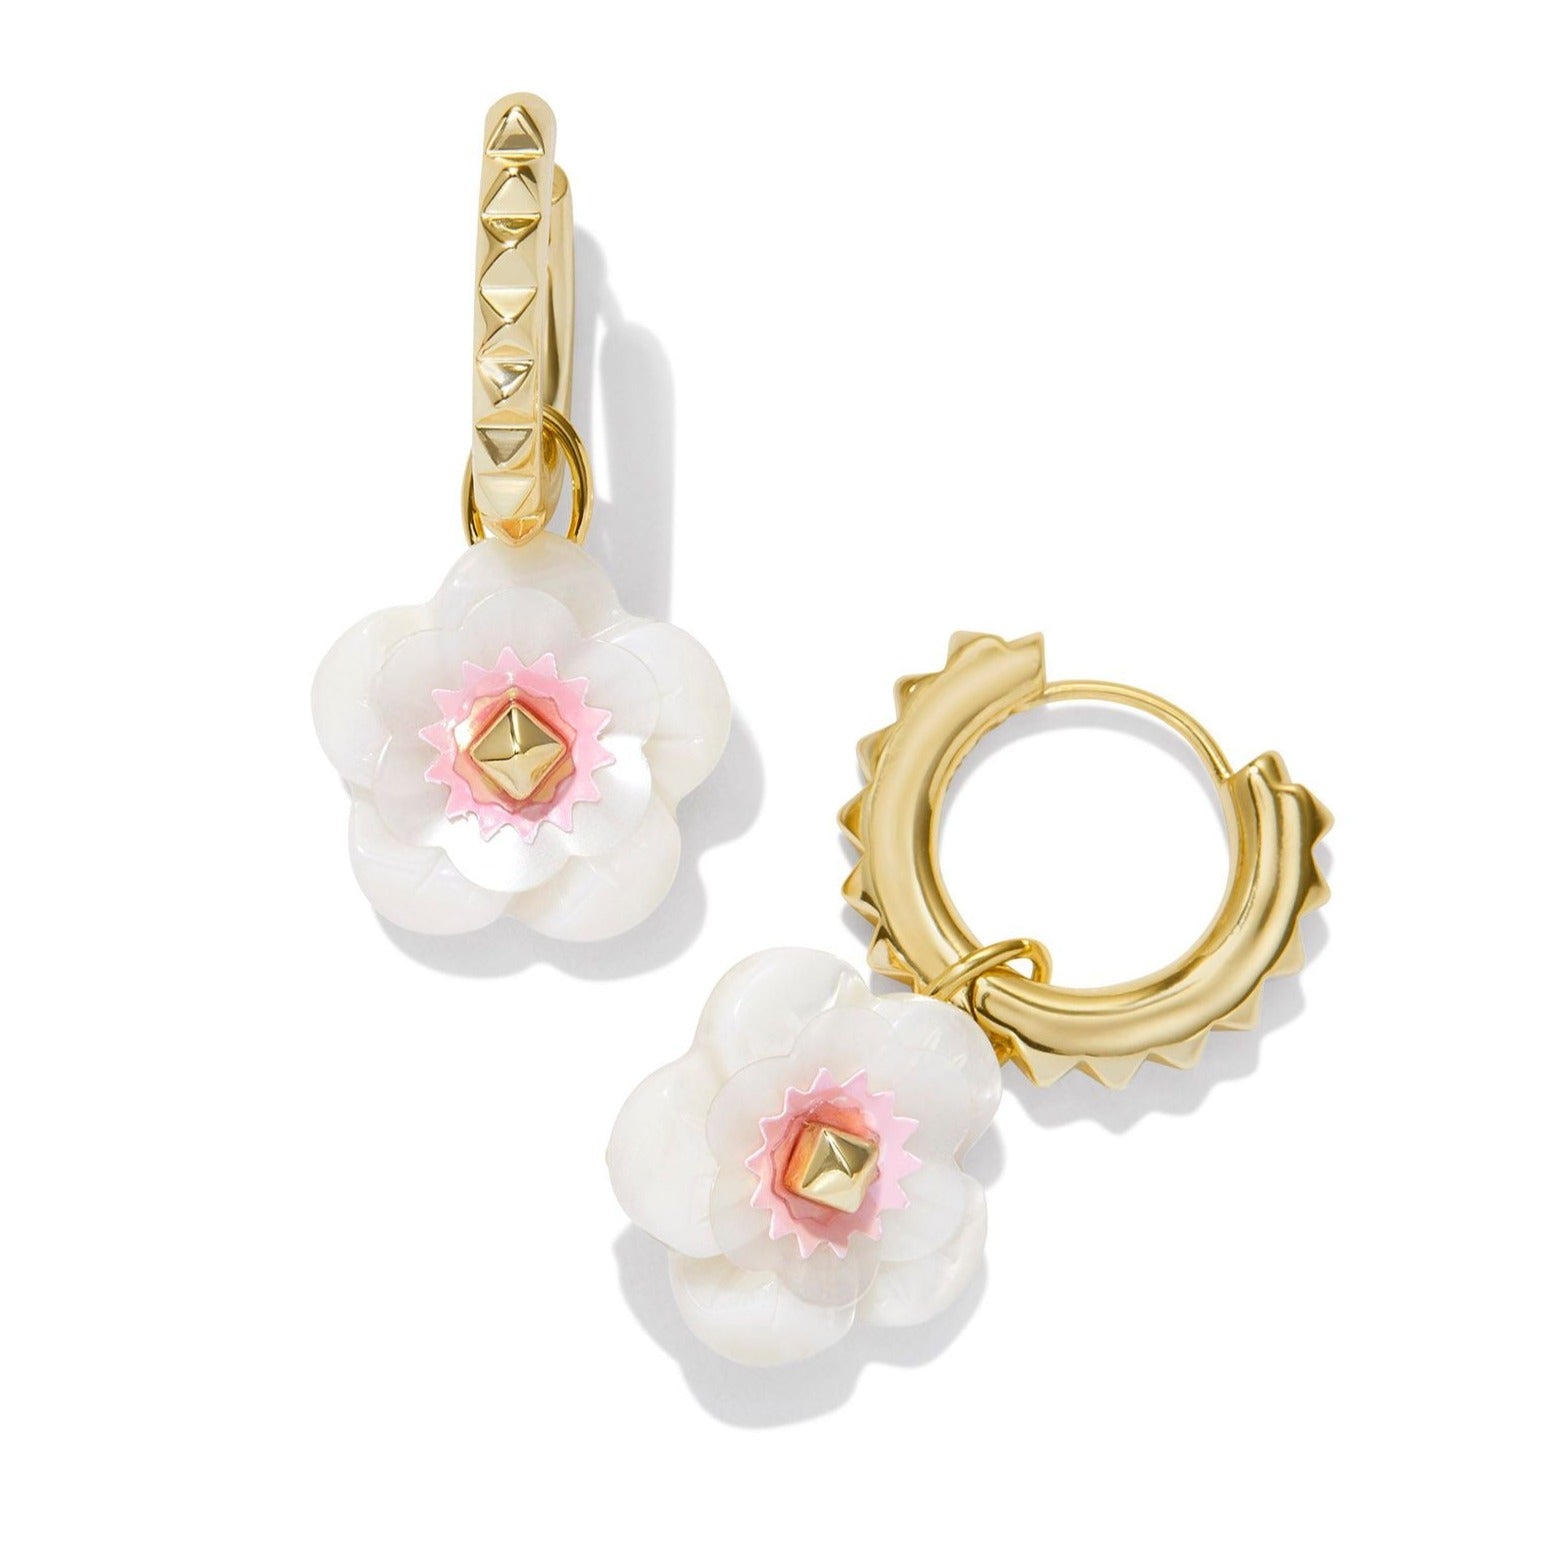 Kendra Scott | Deliah Gold Huggie Earrings in Iridescent Pink and White Mix - Giddy Up Glamour Boutique